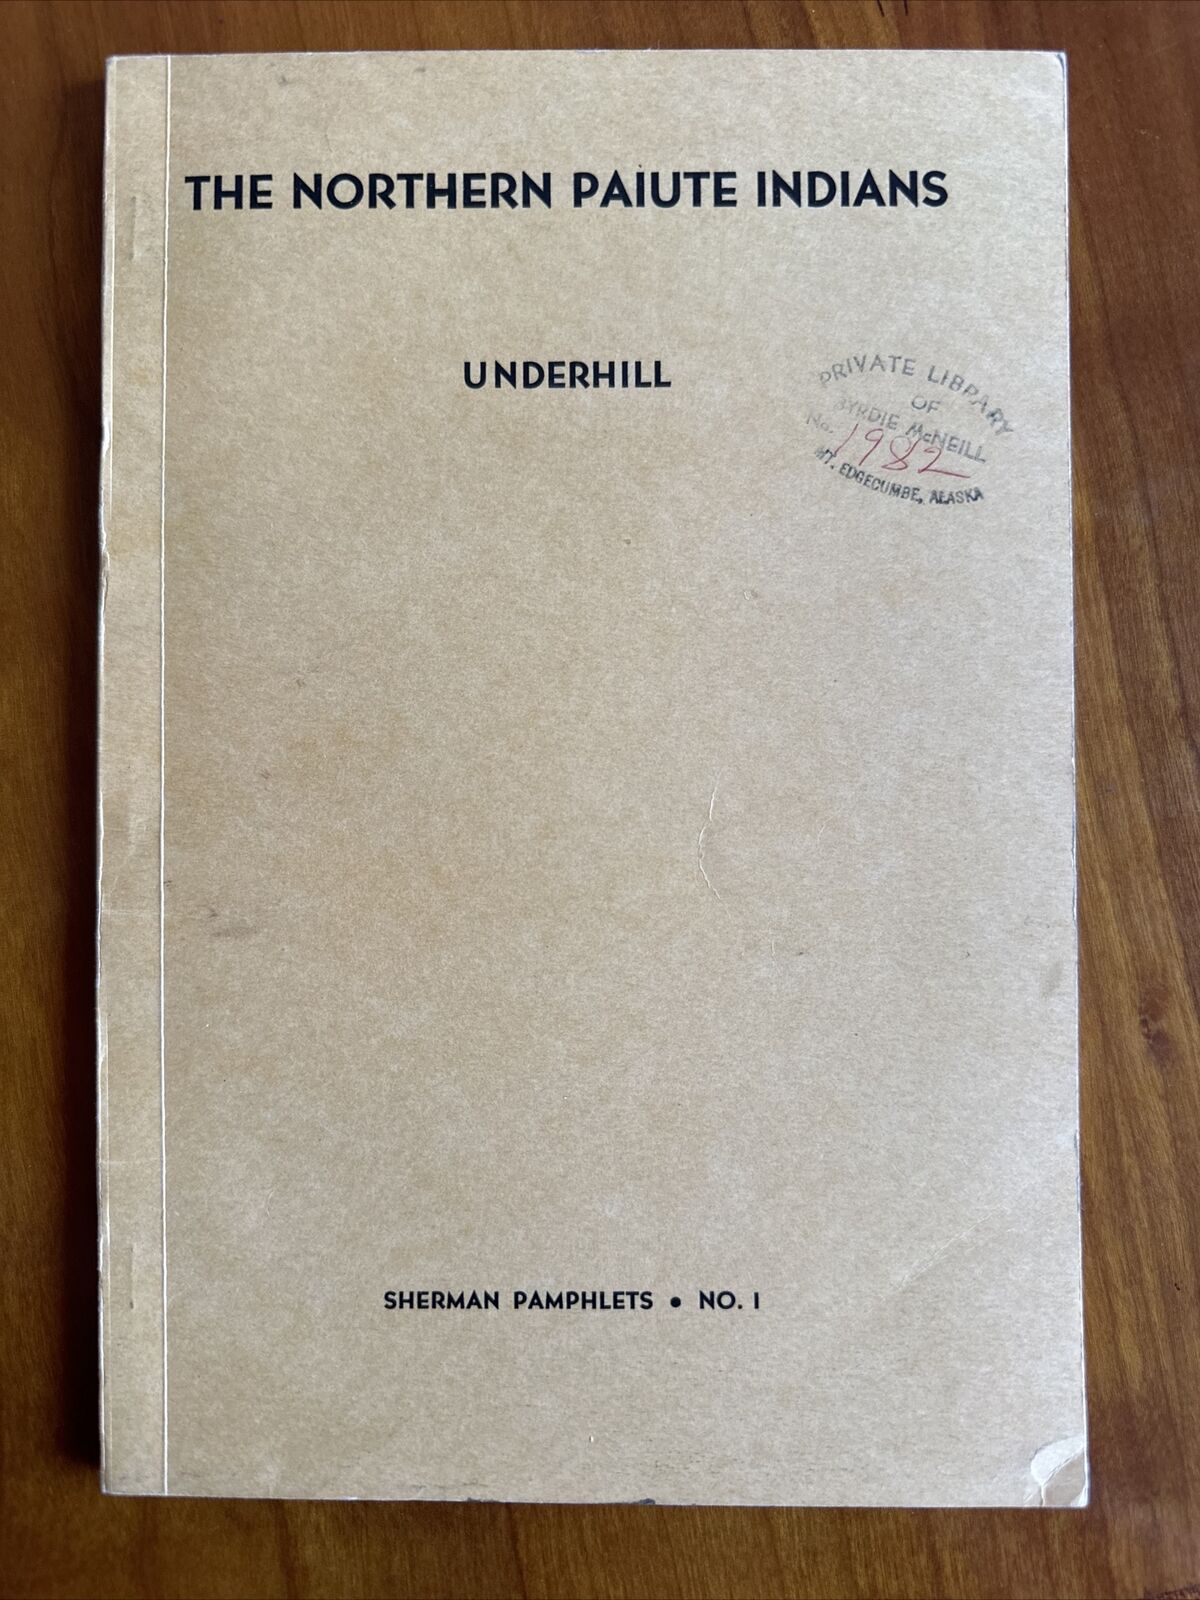 The Northern Paiute Indians Underhill Sherman Pamphlets No 1